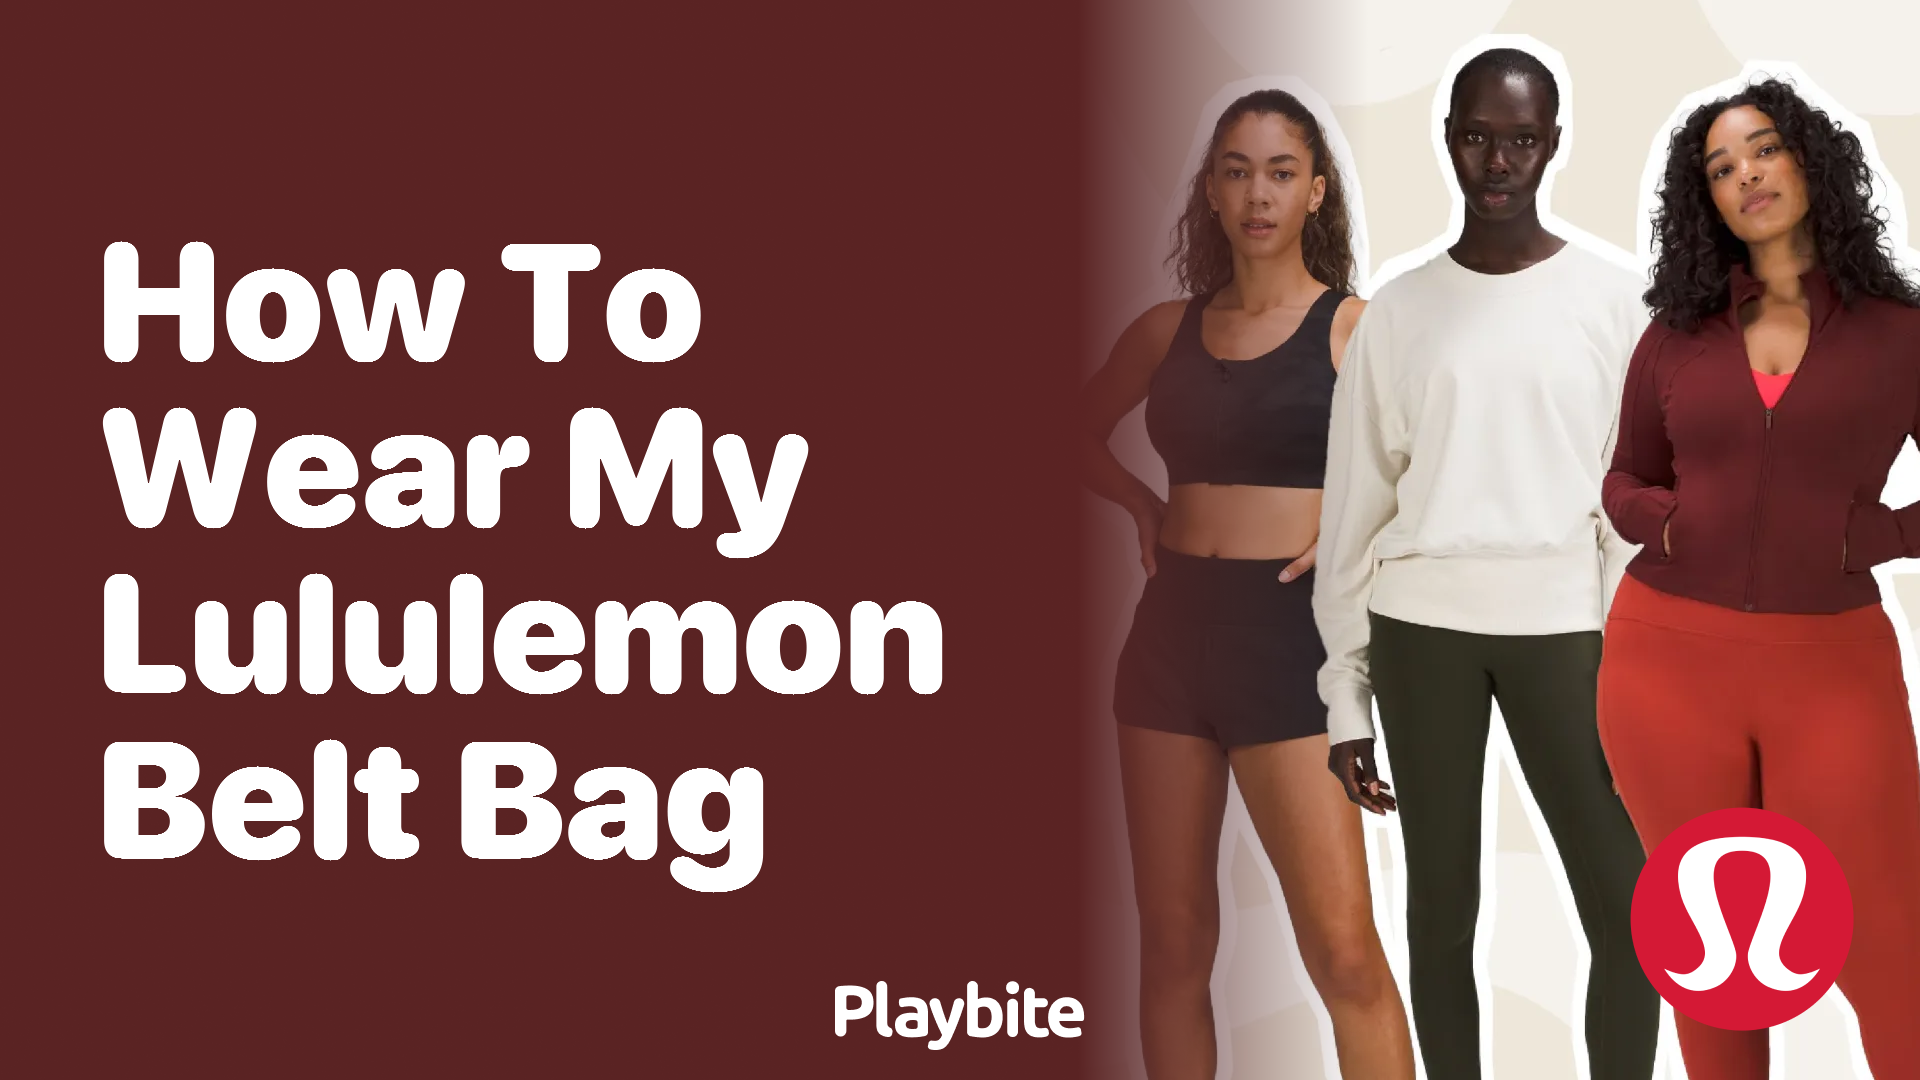 How to Wear Your Lululemon Belt Bag for Maximum Style and Comfort - Playbite